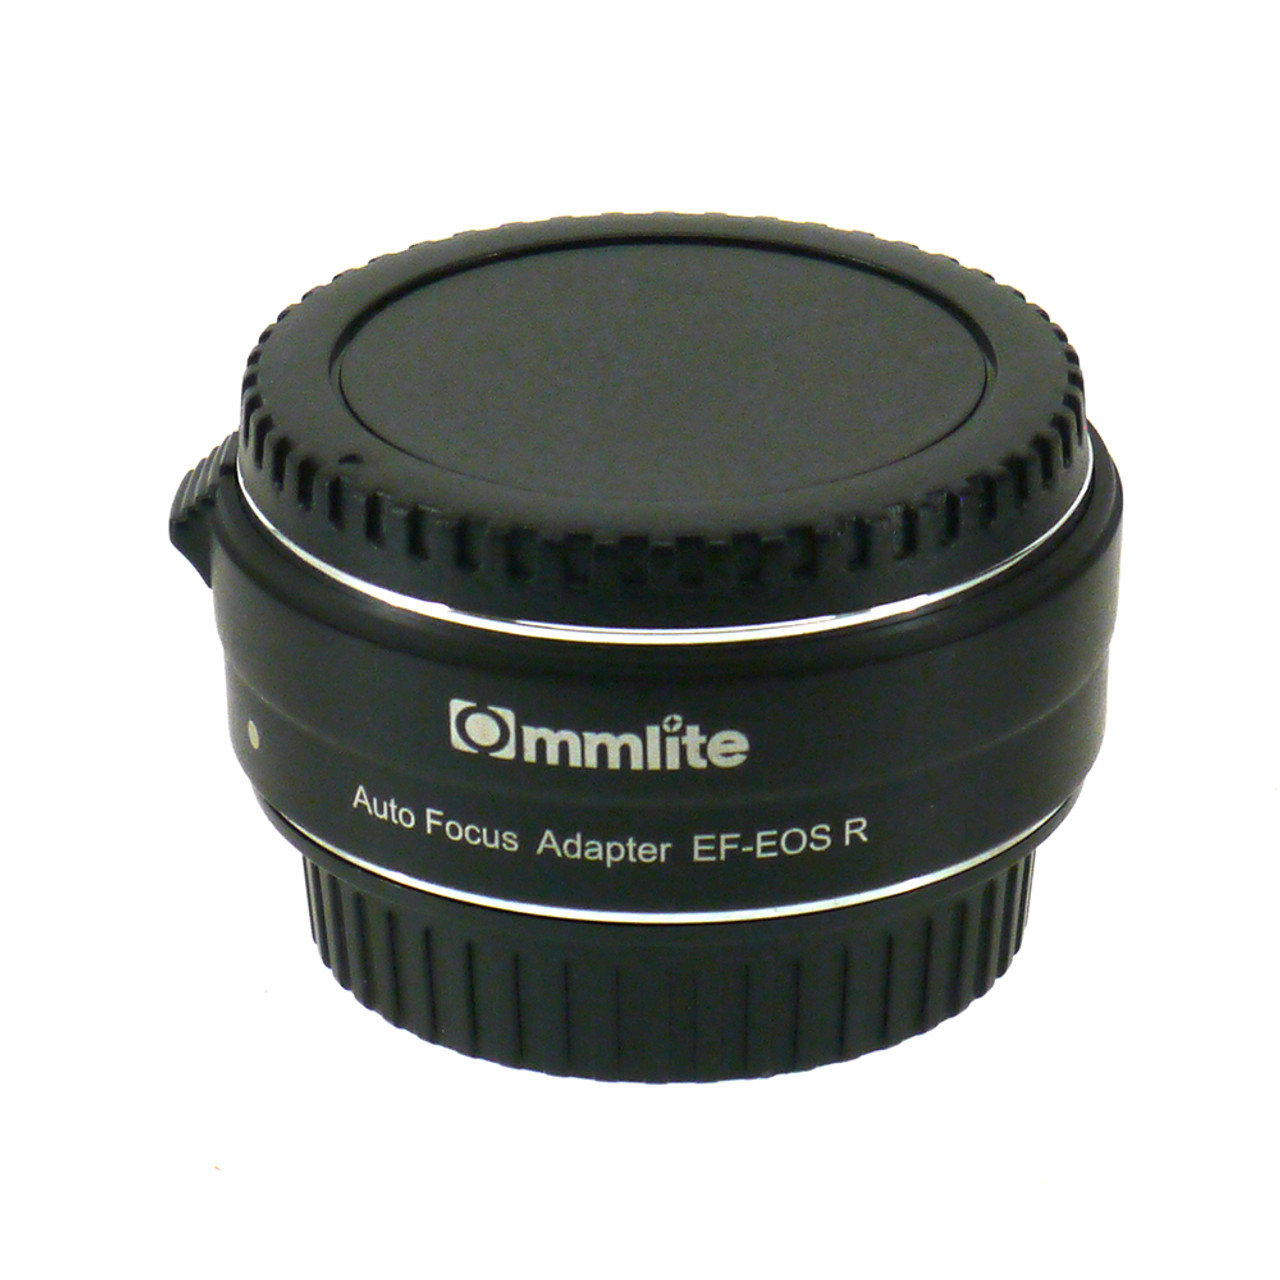 USED EF-EOS R ADAPTER (COMMLITE)